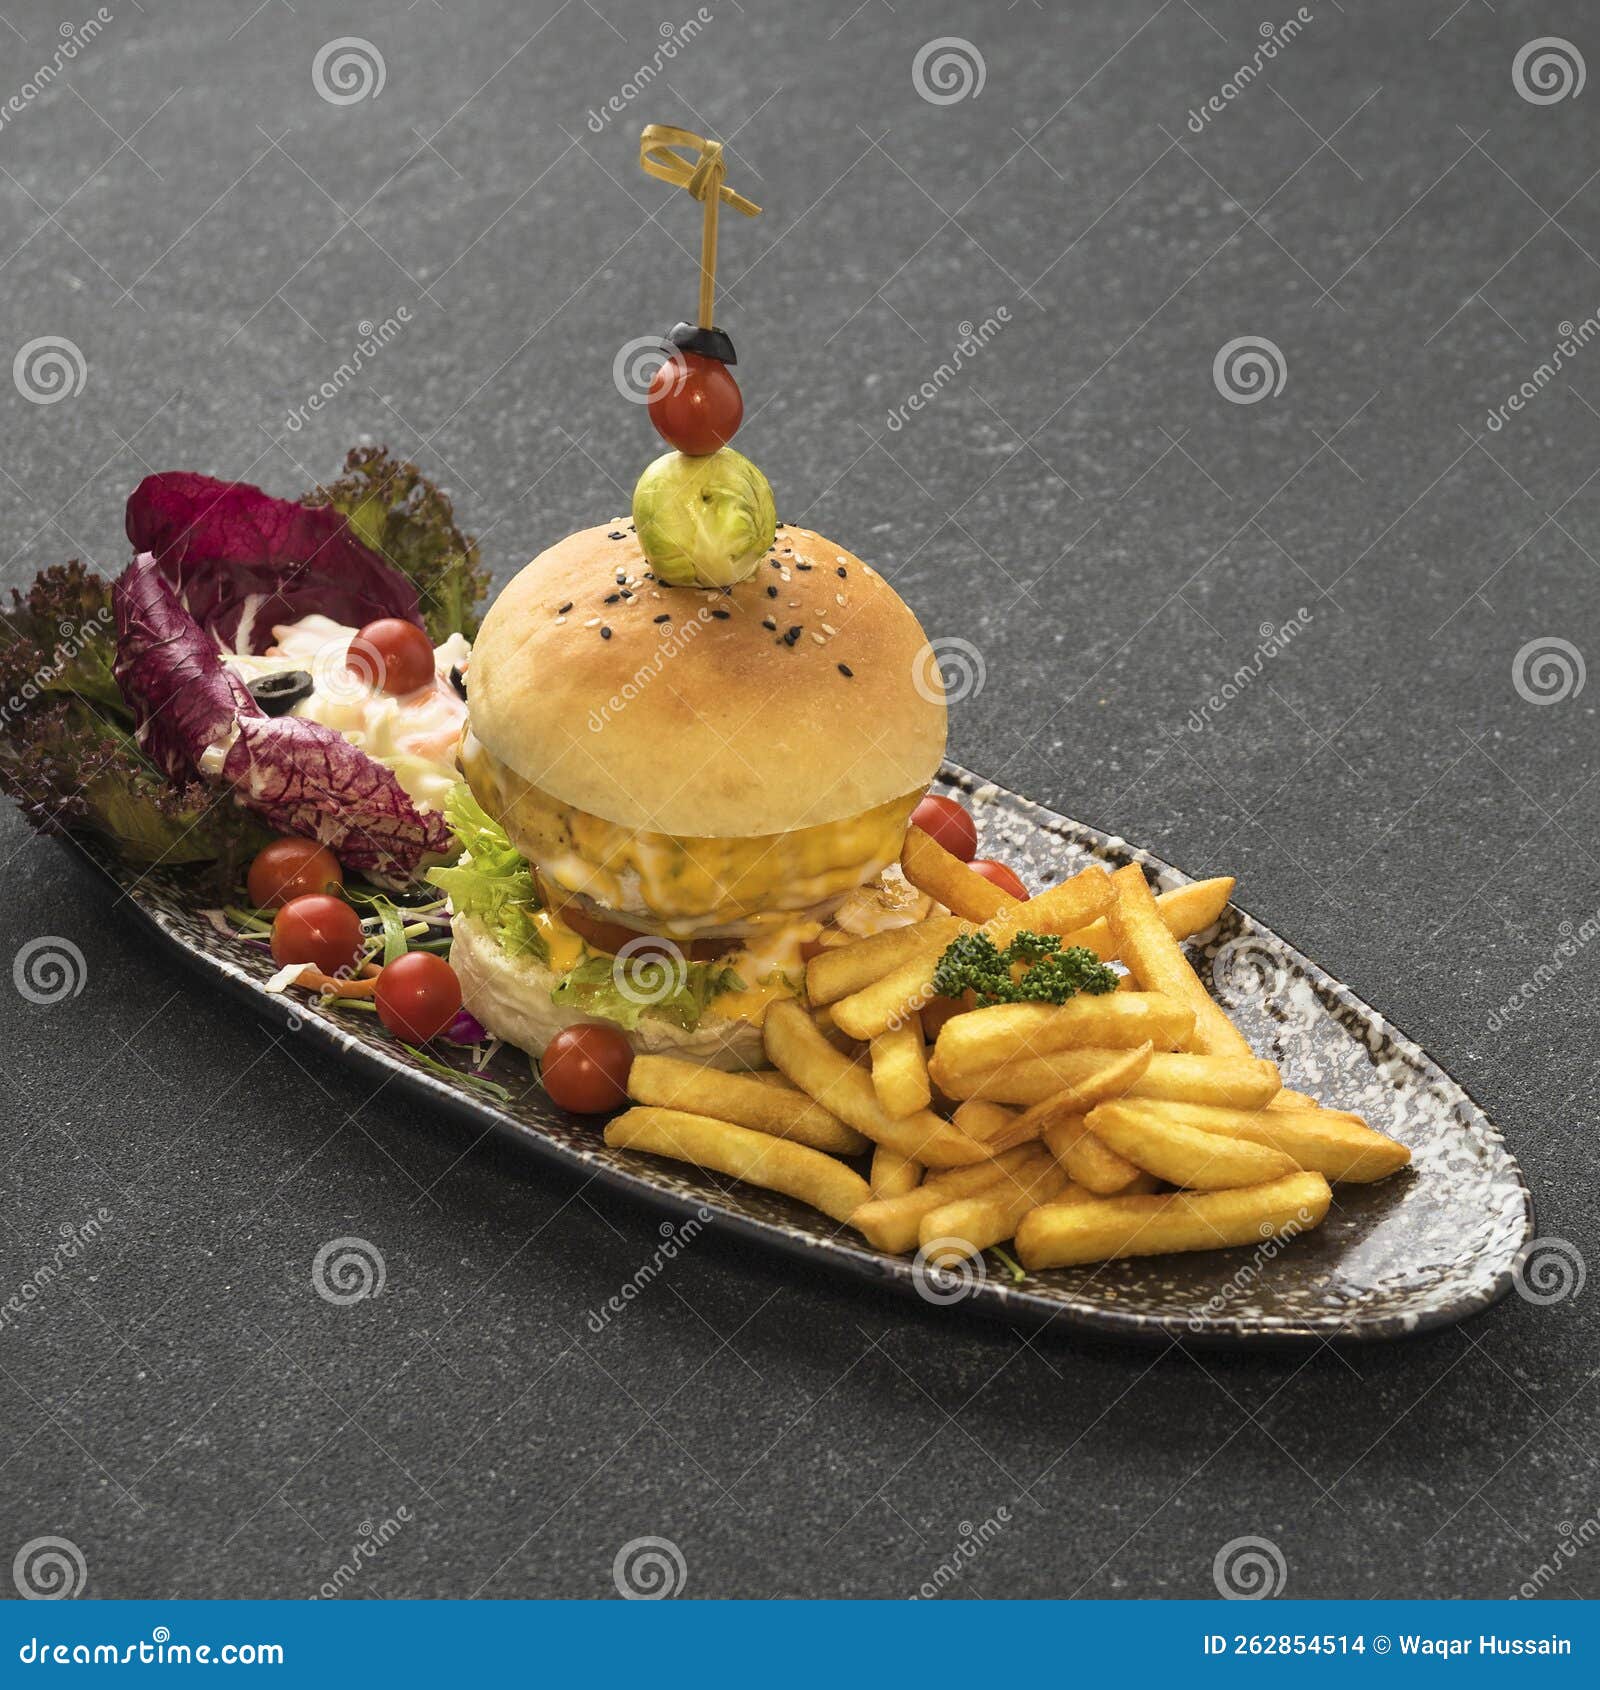 spicy chicken mexicano burger with french fries served in dish  on table top view of fastfood